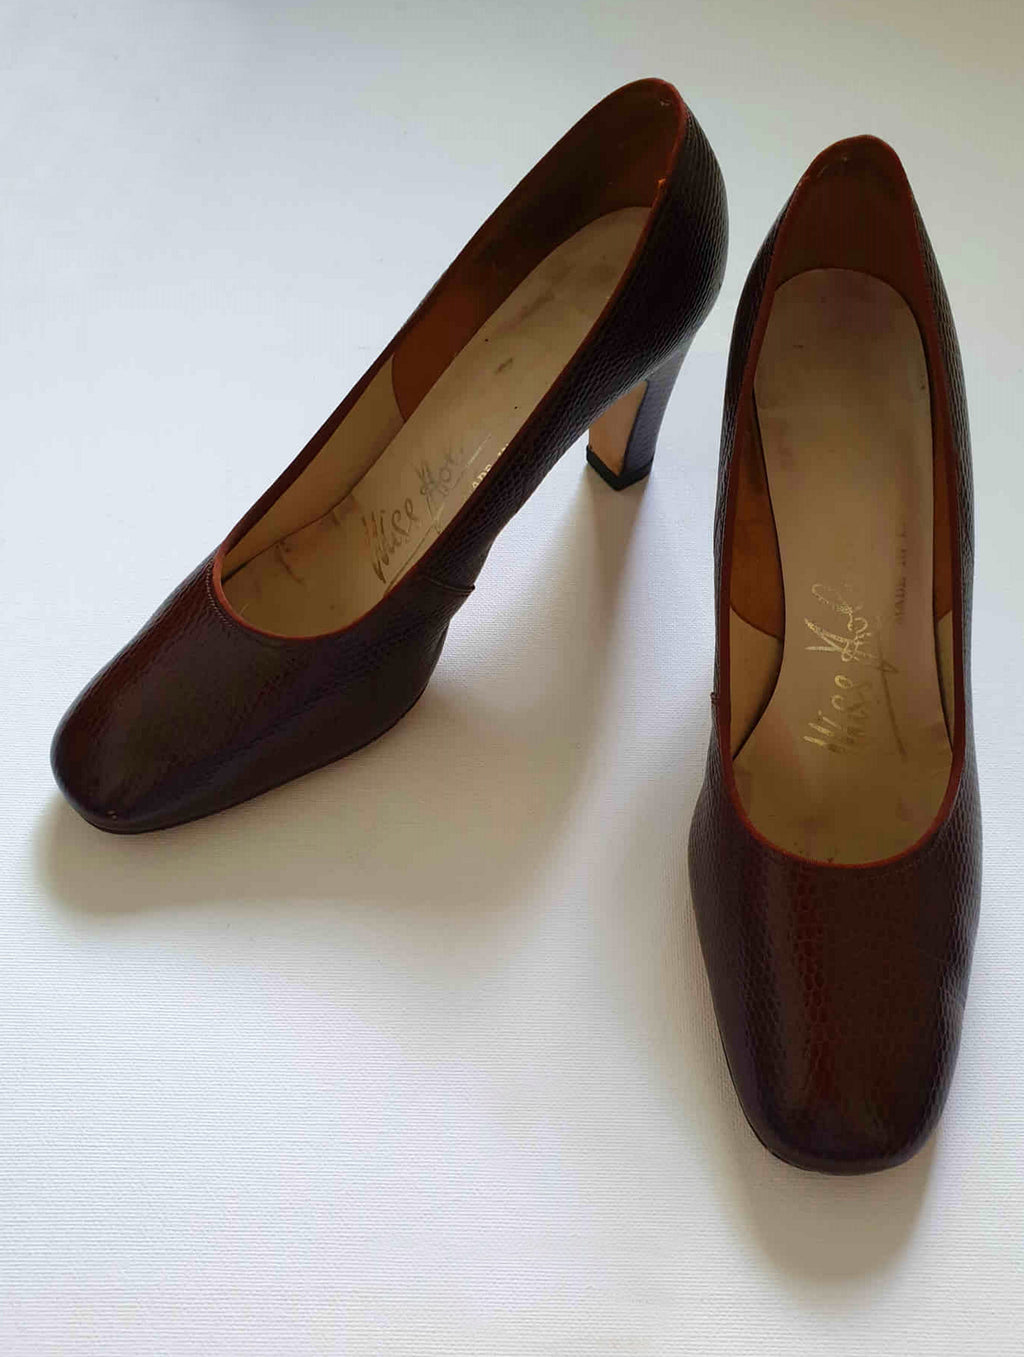 1960s vintage brown lizard look leather pumps by miss holmes size 7B